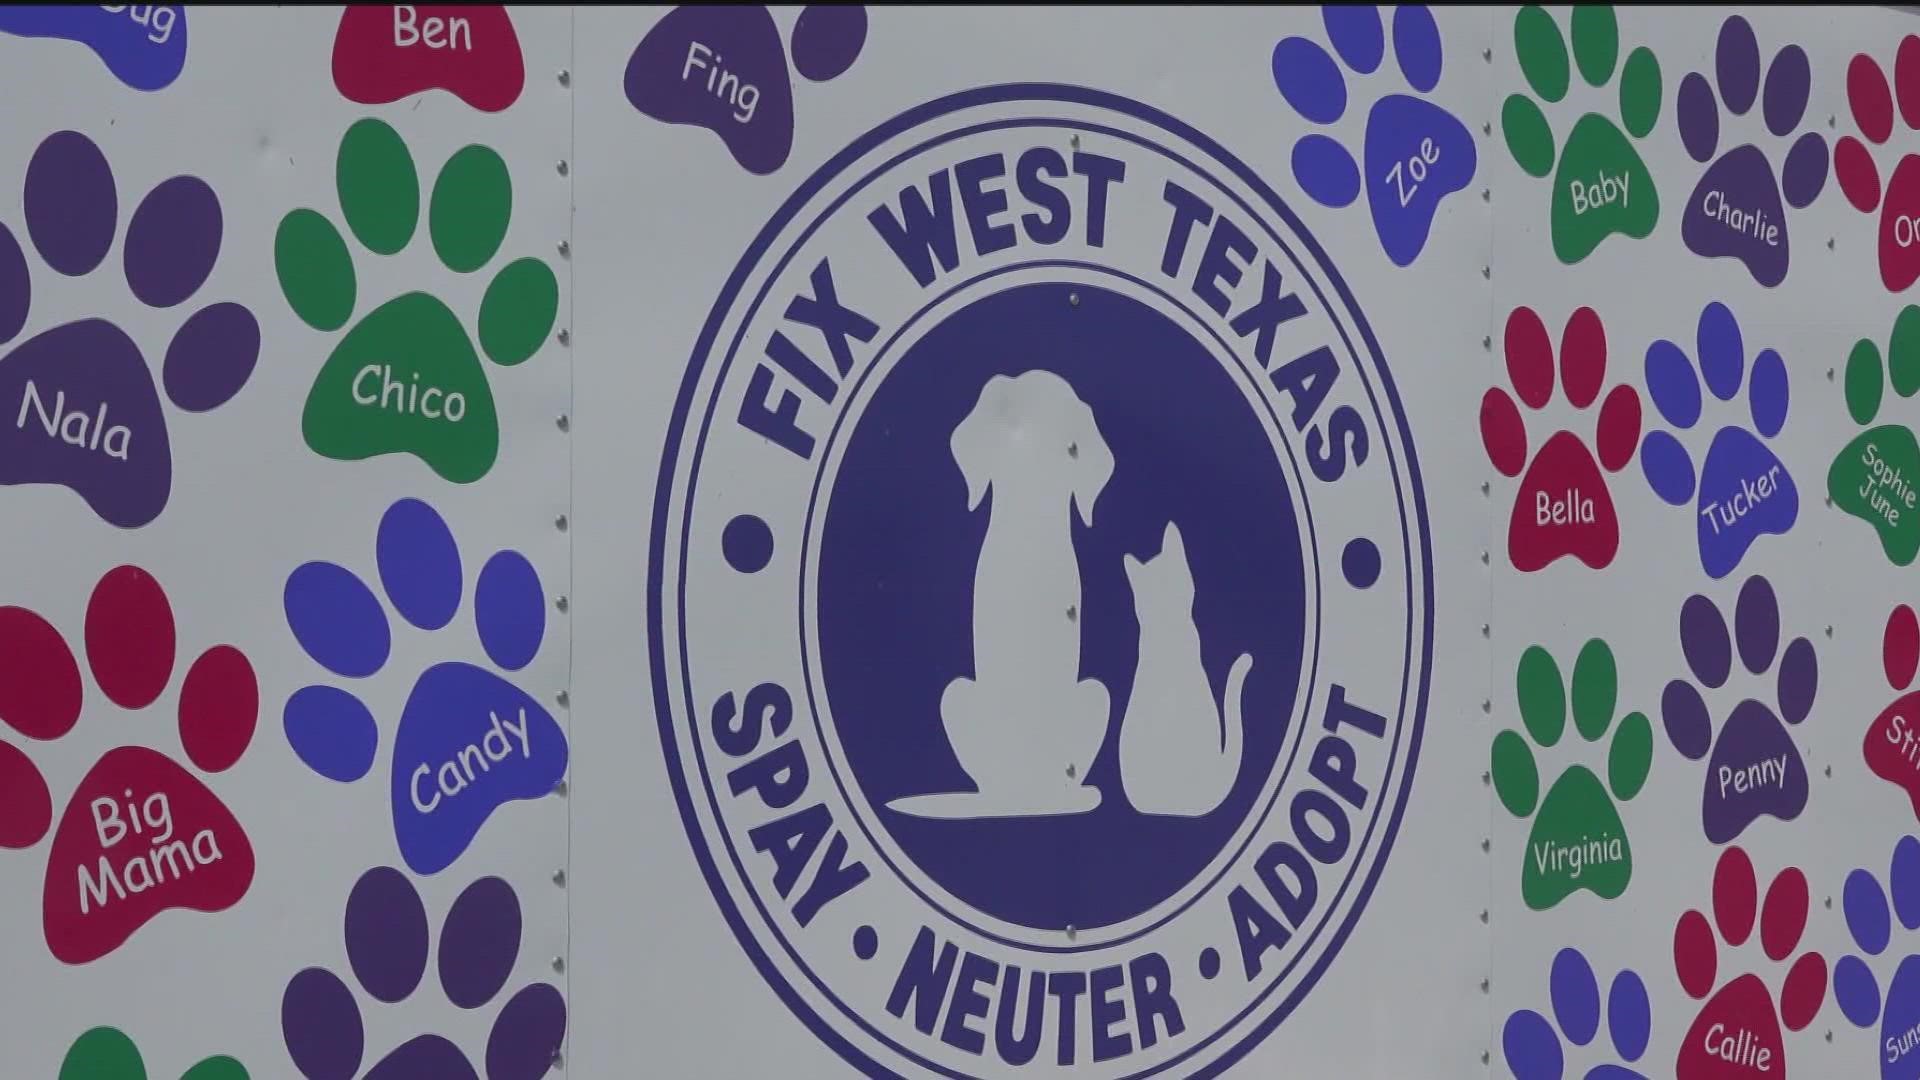 If you need to spay or neuter your cat, the nonprofit is offering a special weekend for low-cost appointments.